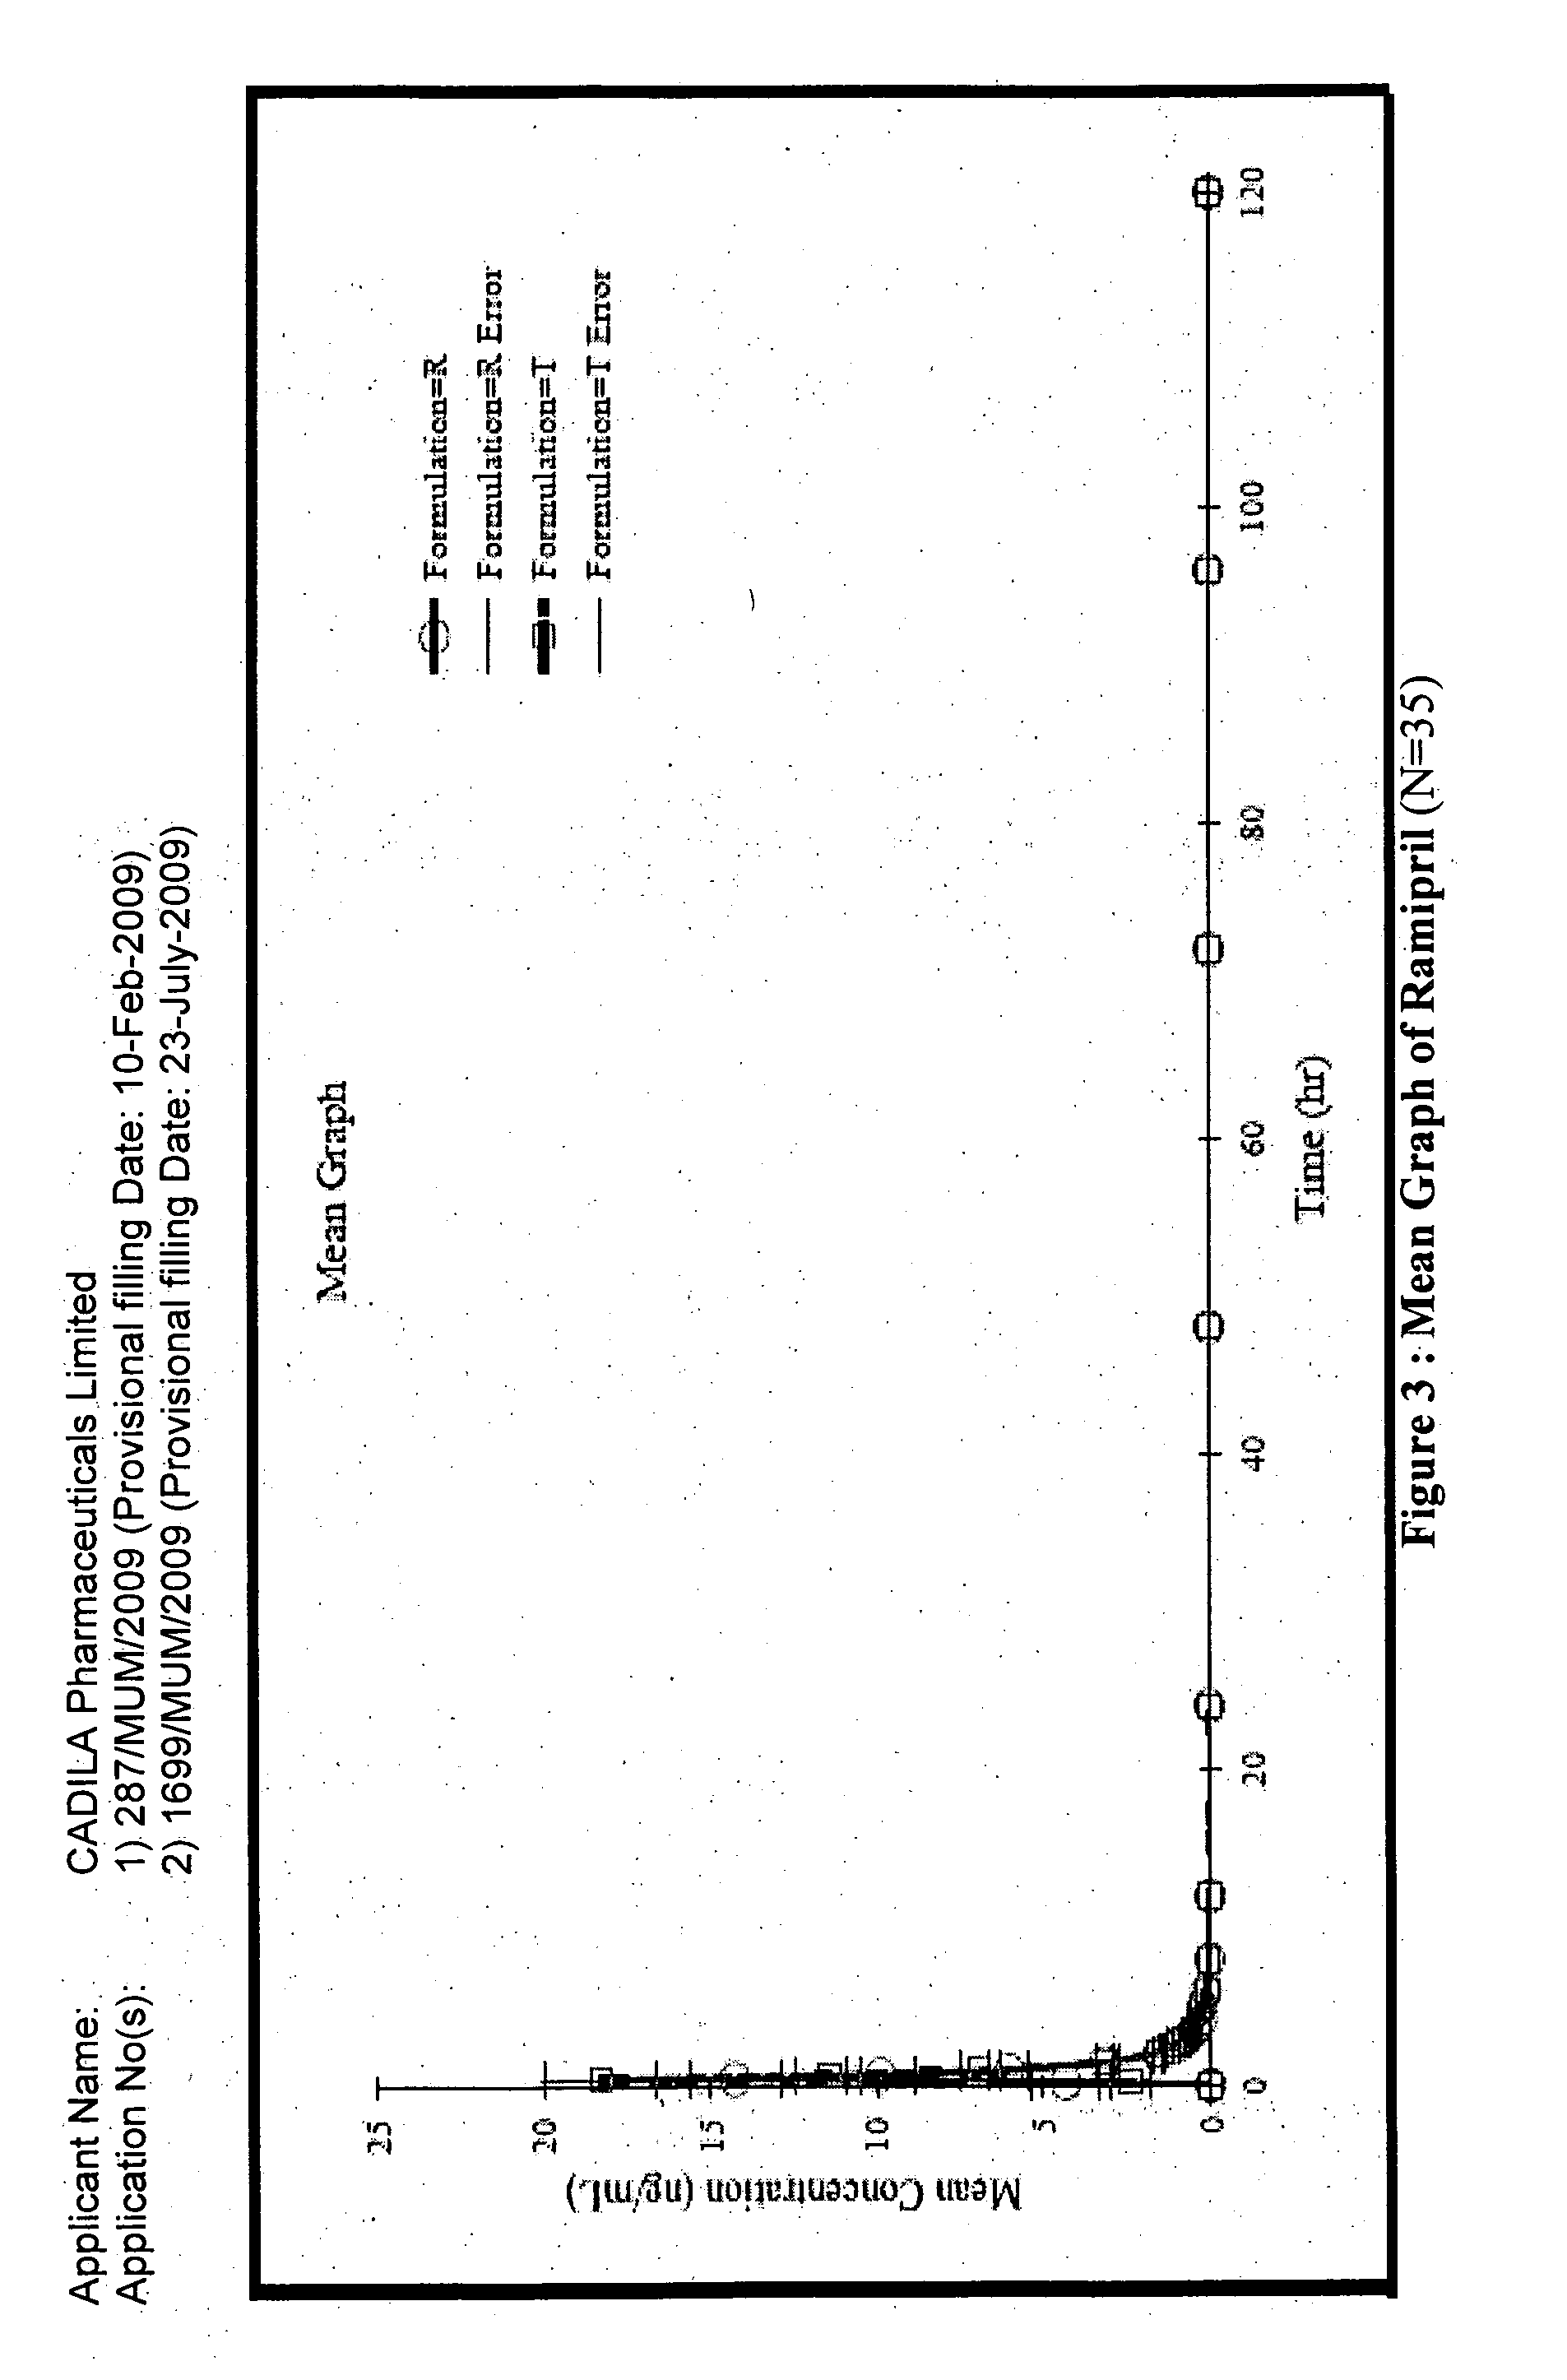 Stable pharmaceutical composition for atherosclerosis